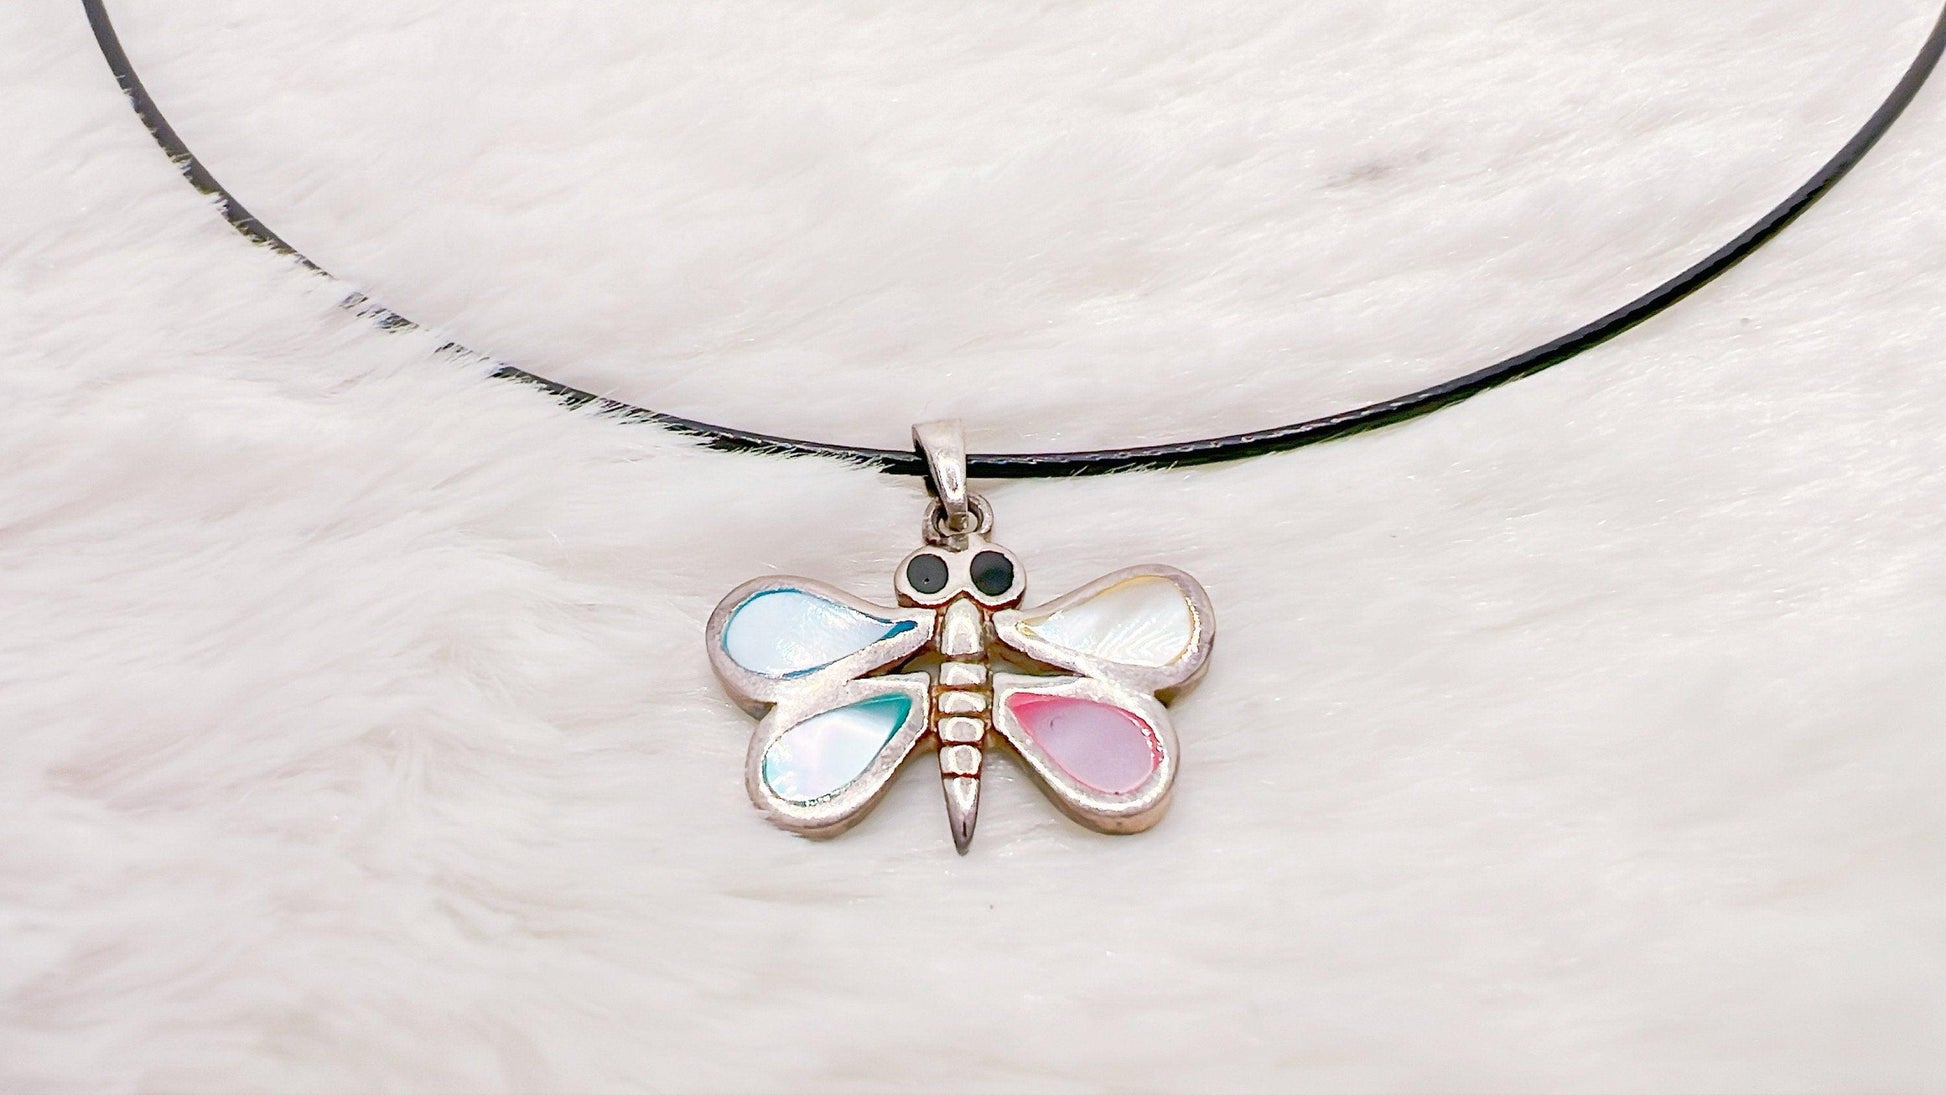 Colorful Dragonfly Necklace, Dragonfly Jewelry, Summer Gift, Insect Necklace, Bug Necklace, Dragonfly Charm, Dragonfly Pendant, Gift For Her